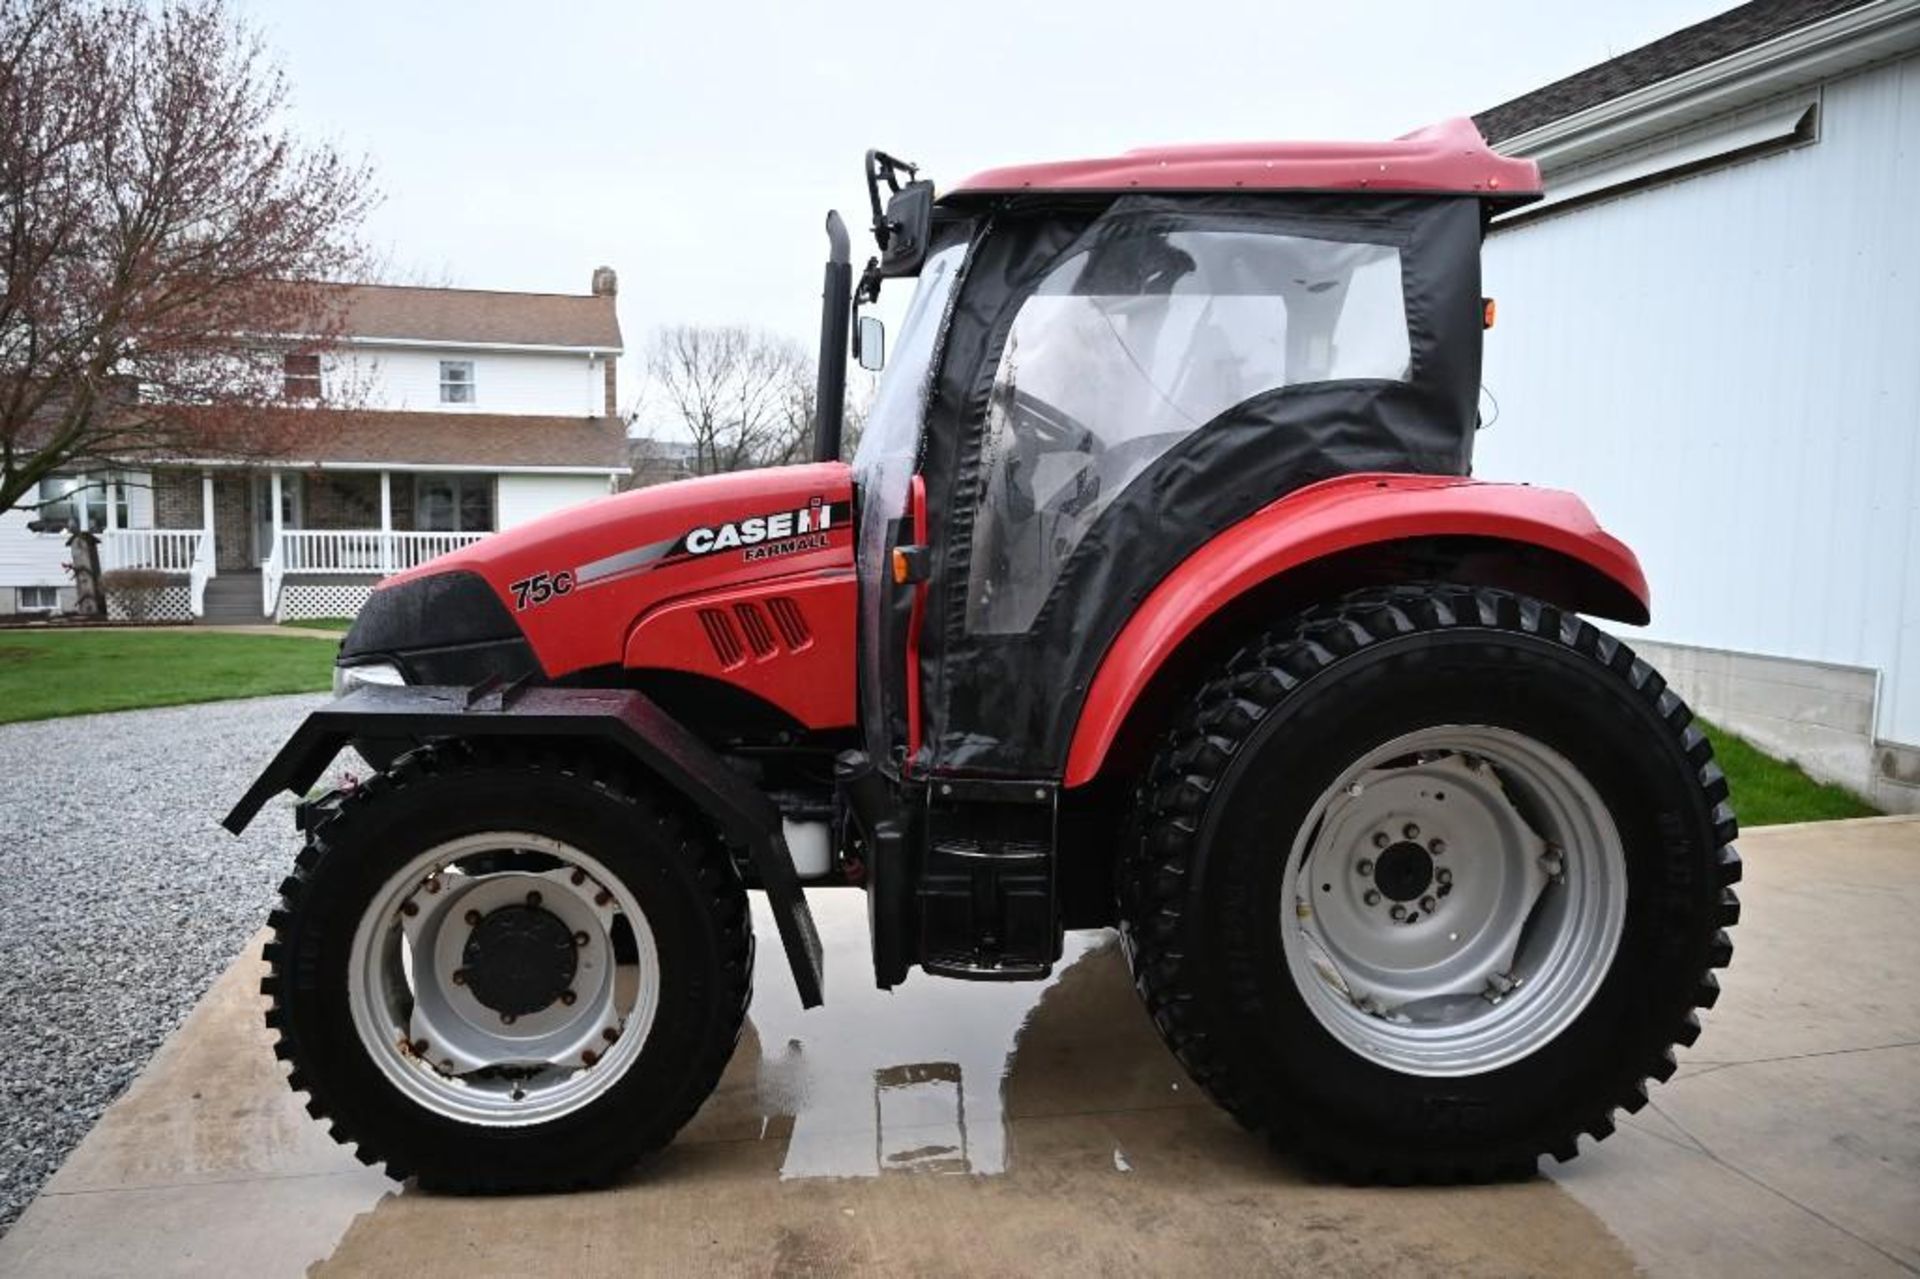 2015 Case IH 75C Tractor - Image 2 of 135